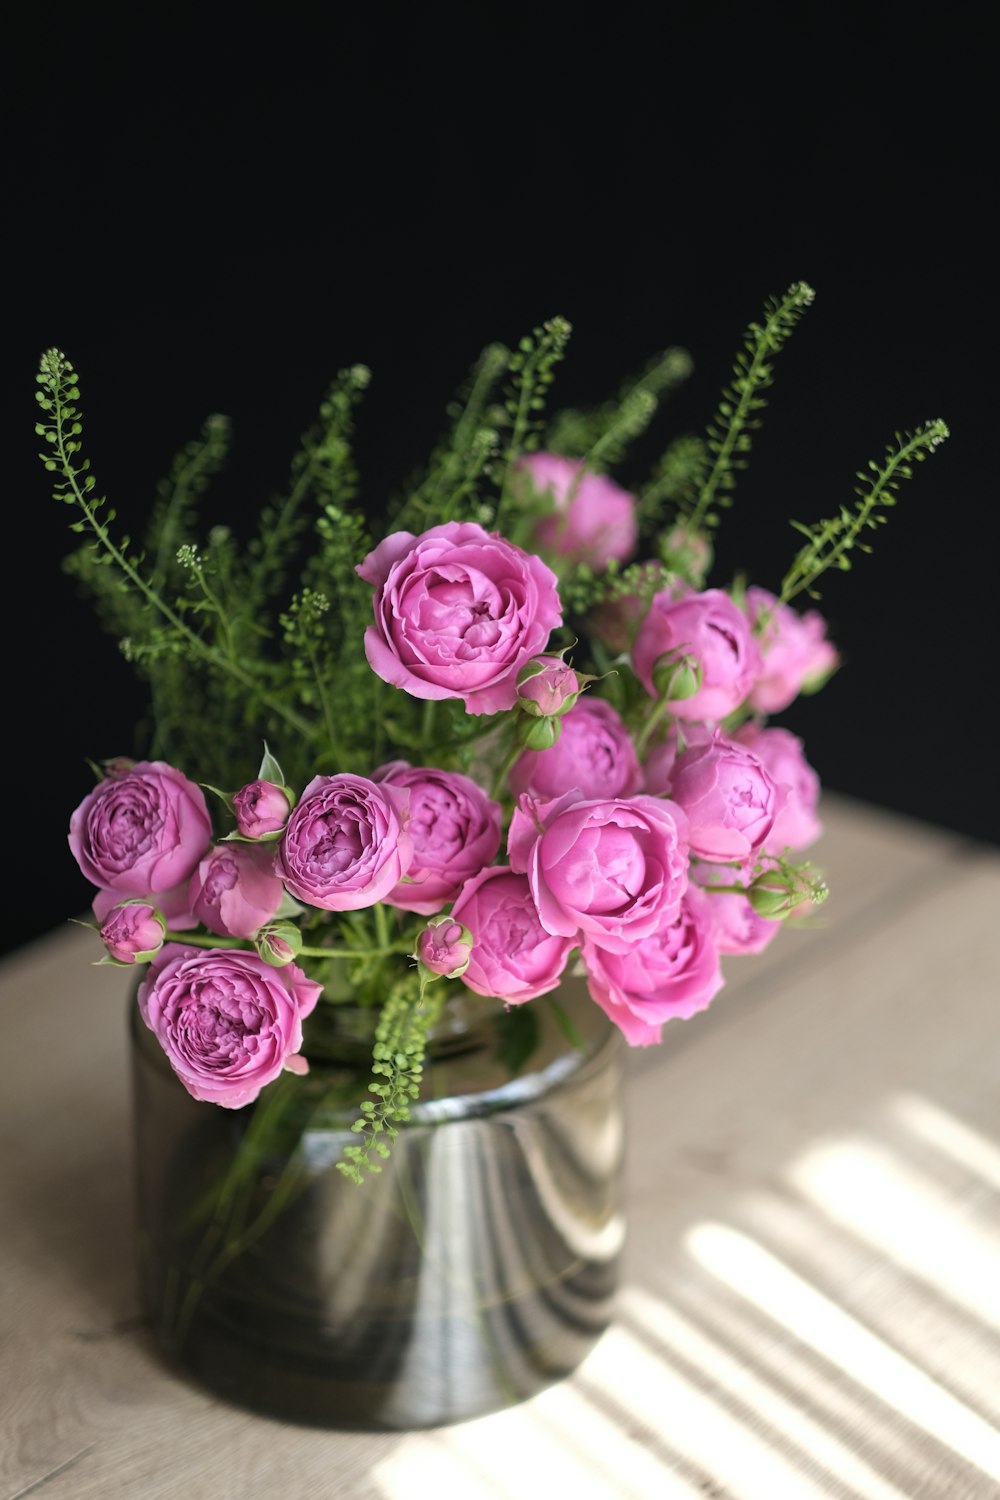 a vase filled with pink flowers on top of a table